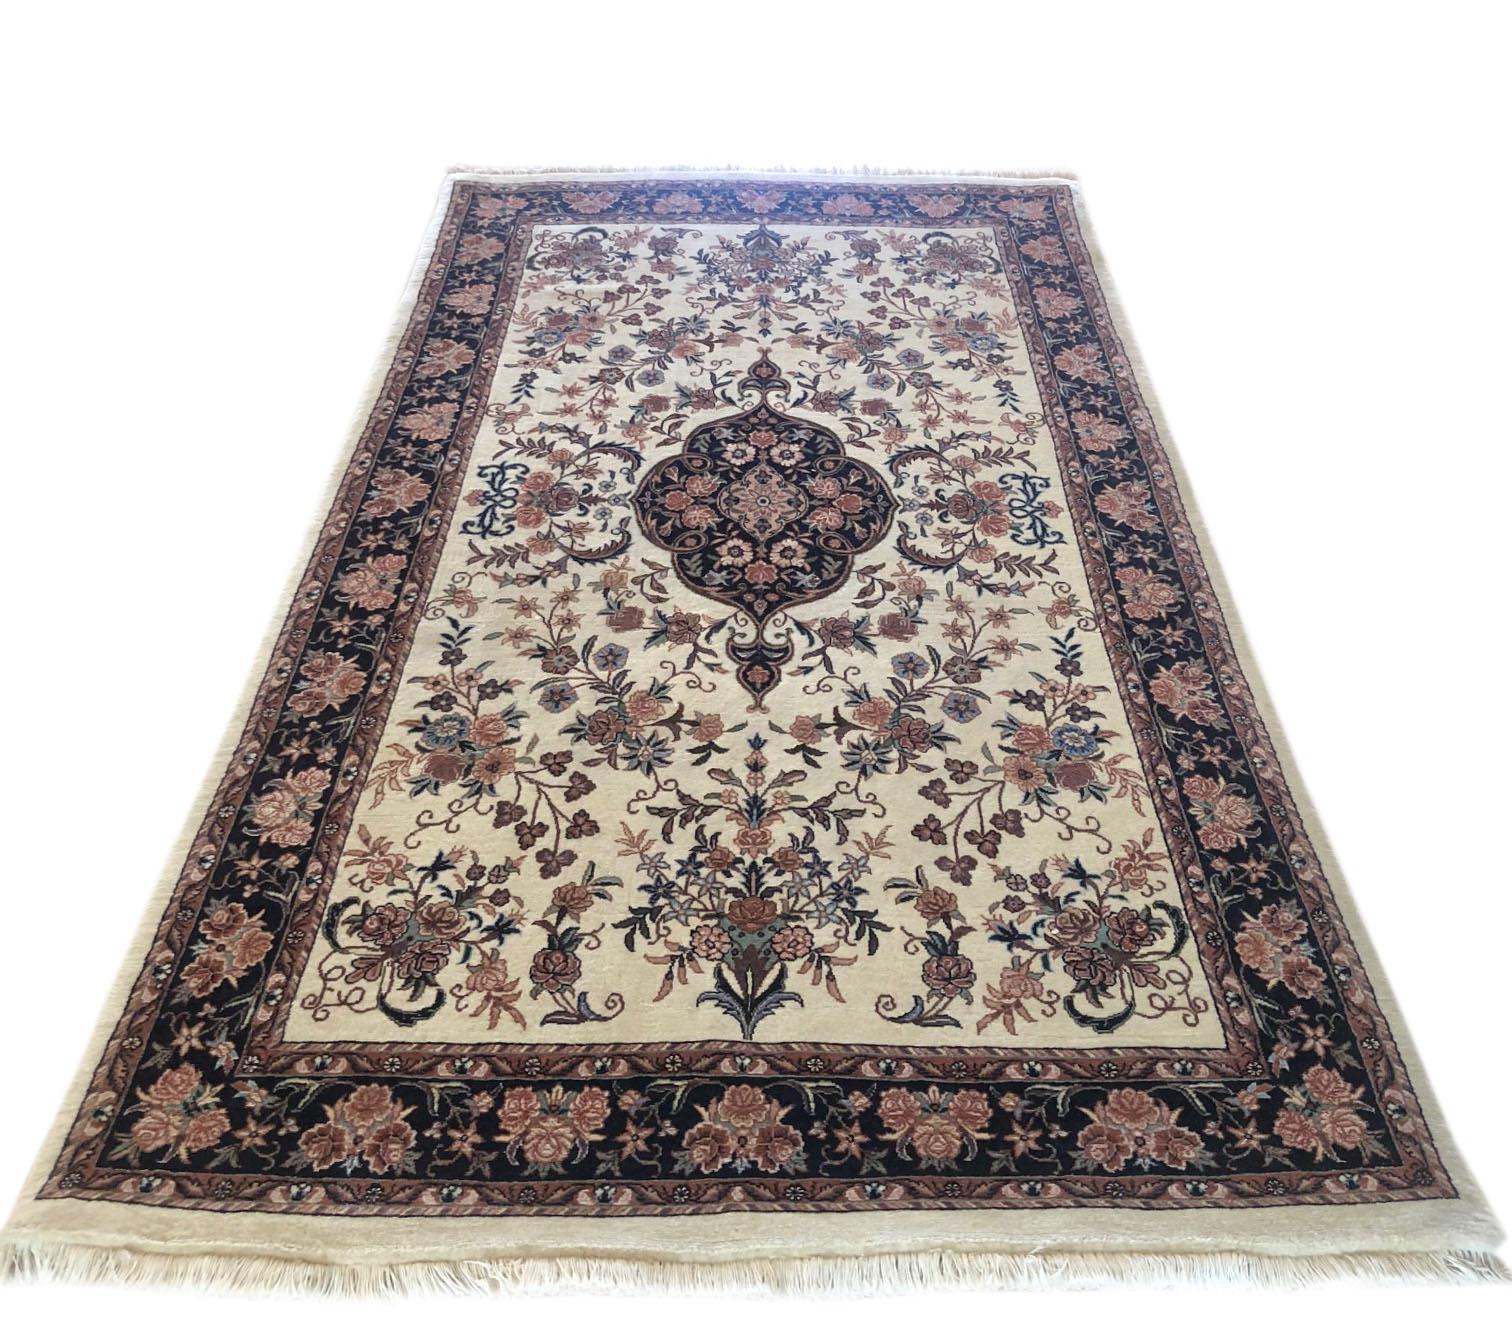 This piece is a handmade Persian Bijar rug. The pile is wool and silk with cotton foundation. The base color is cream, with black border. Bijar rugs are well-known for their craftsmanship and design. The heavy wool foundation makes this rug very